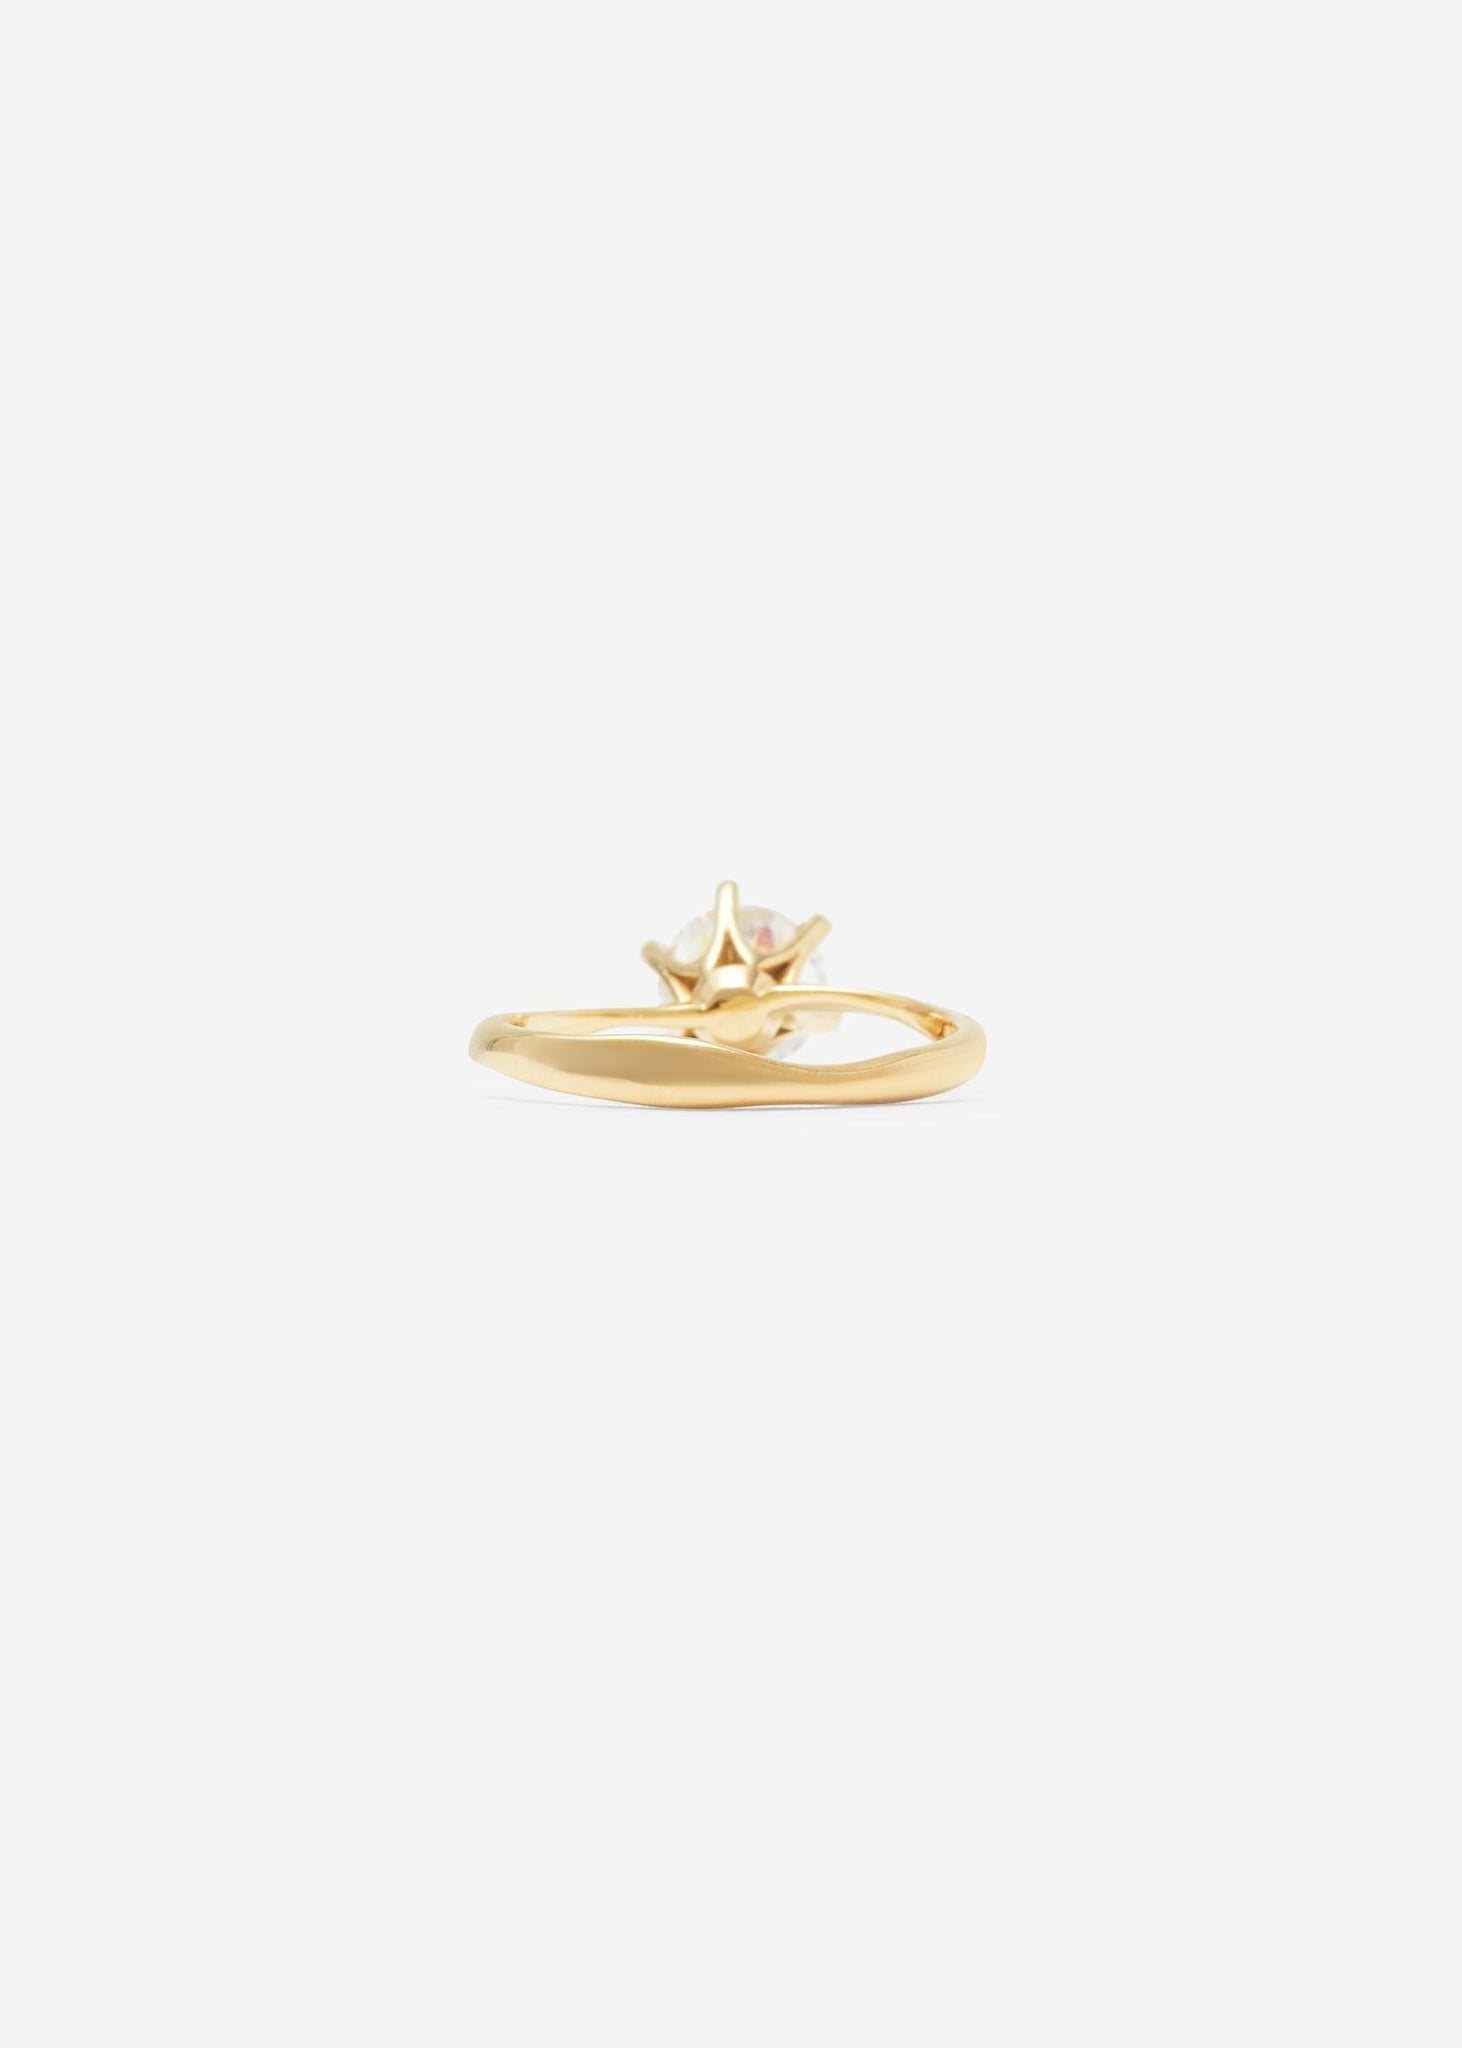 Molded Brilliant Cut Solitaire Ring Maxi 0.7 - 0.9 Ct - Customised - 3